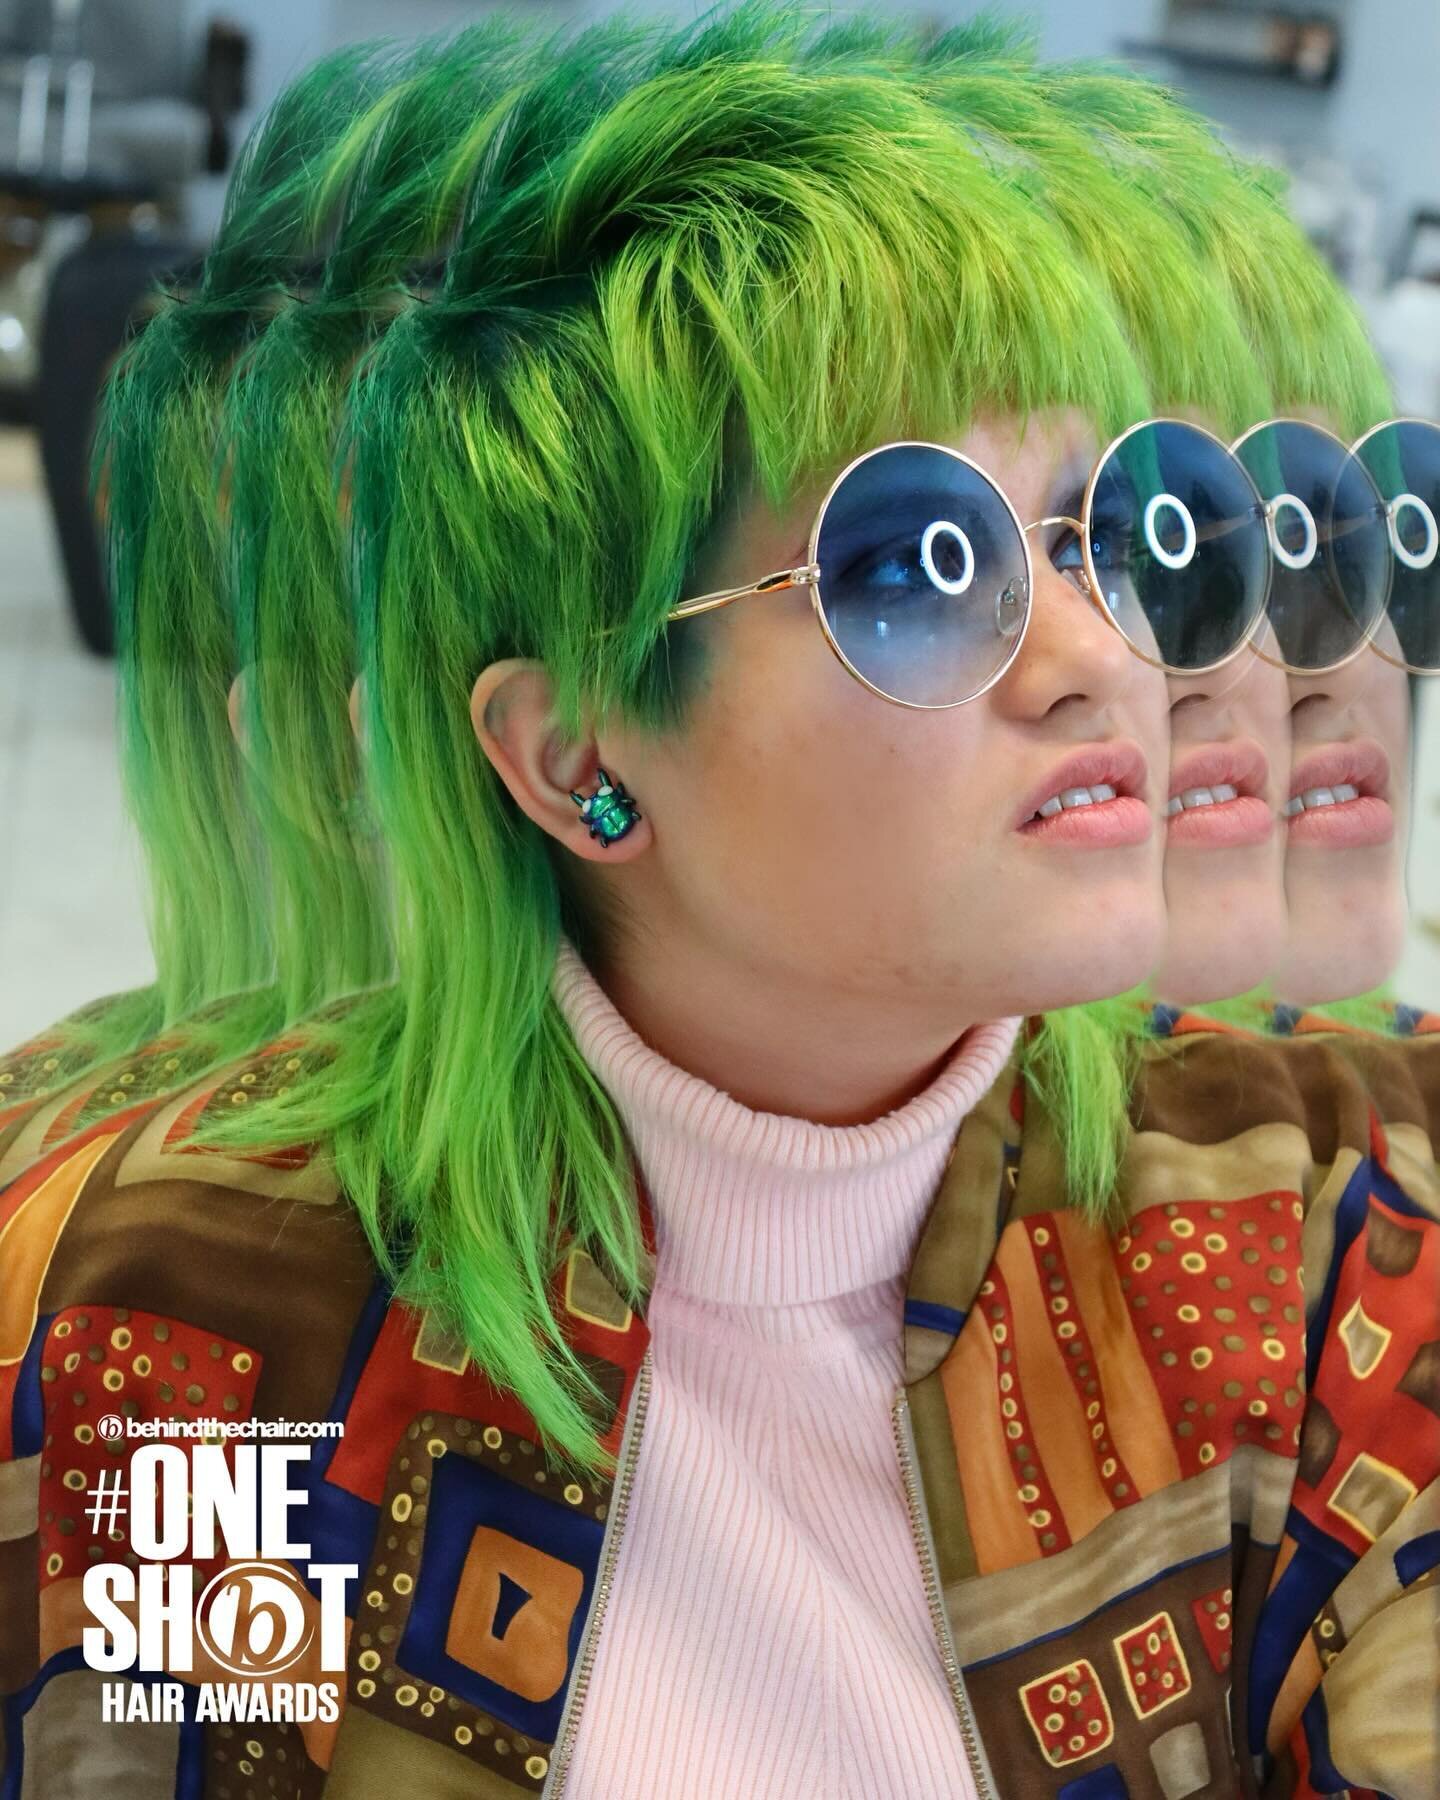 I&rsquo;ve decided to put myself out there &amp; officially enter the @oneshothairawards this year!
This is entry number one 🤍

#btconeshot2024_creativecolor #btconeshot2024_shagmullet #btconeshot2024_pixiebixie #btconeshot2024_fringe #btcbigshot202